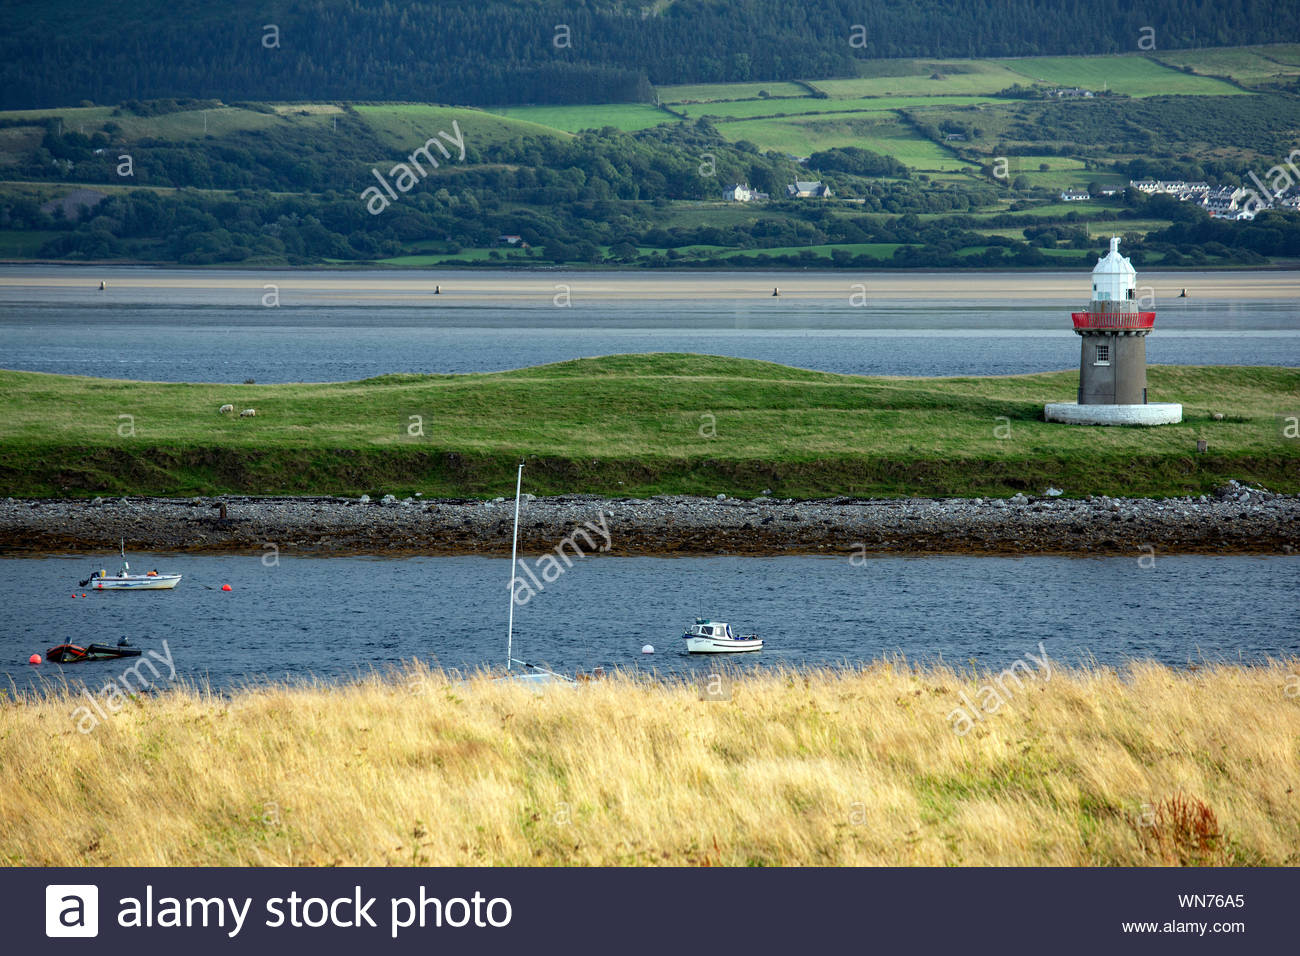 A calm and beautiful summer's evening at Rosses Point, Sligo as tourist numbers climb again in the Republic of Ireland Stock Photo